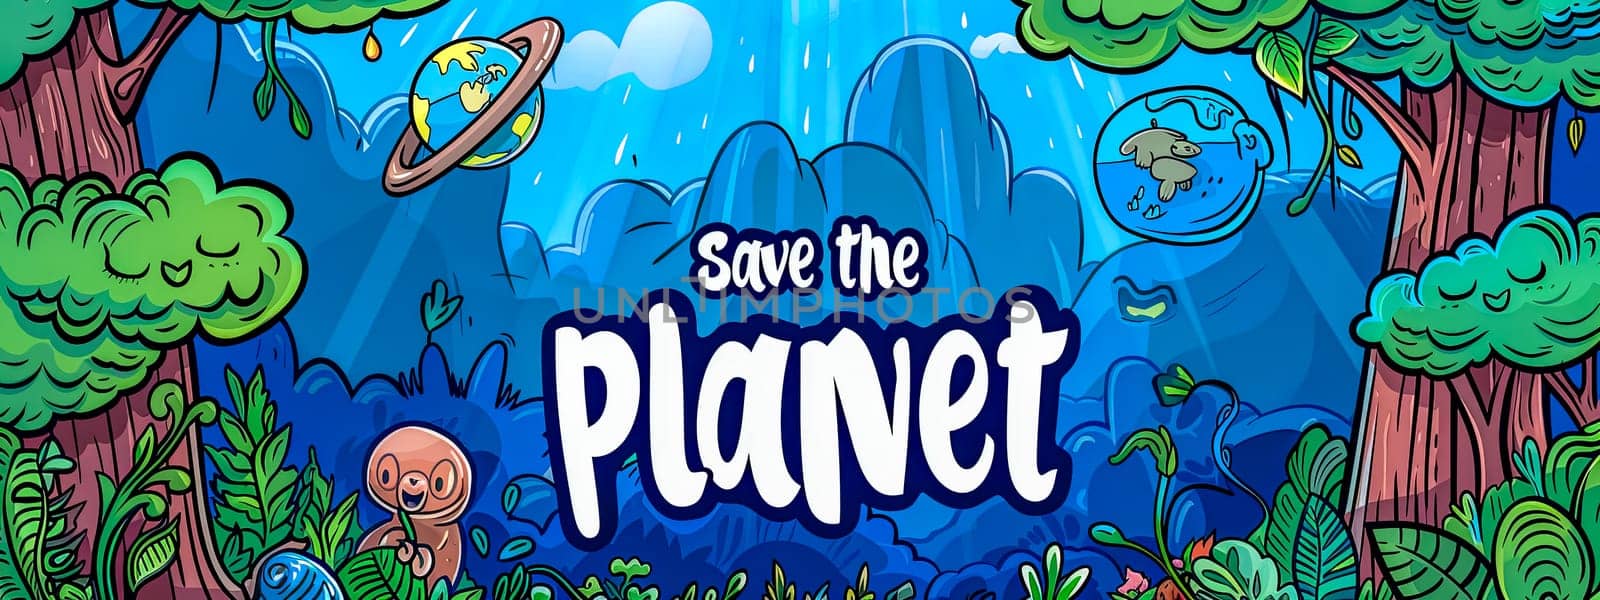 Vibrant cartoon depicting environmental conservation with trees, animals, and earth